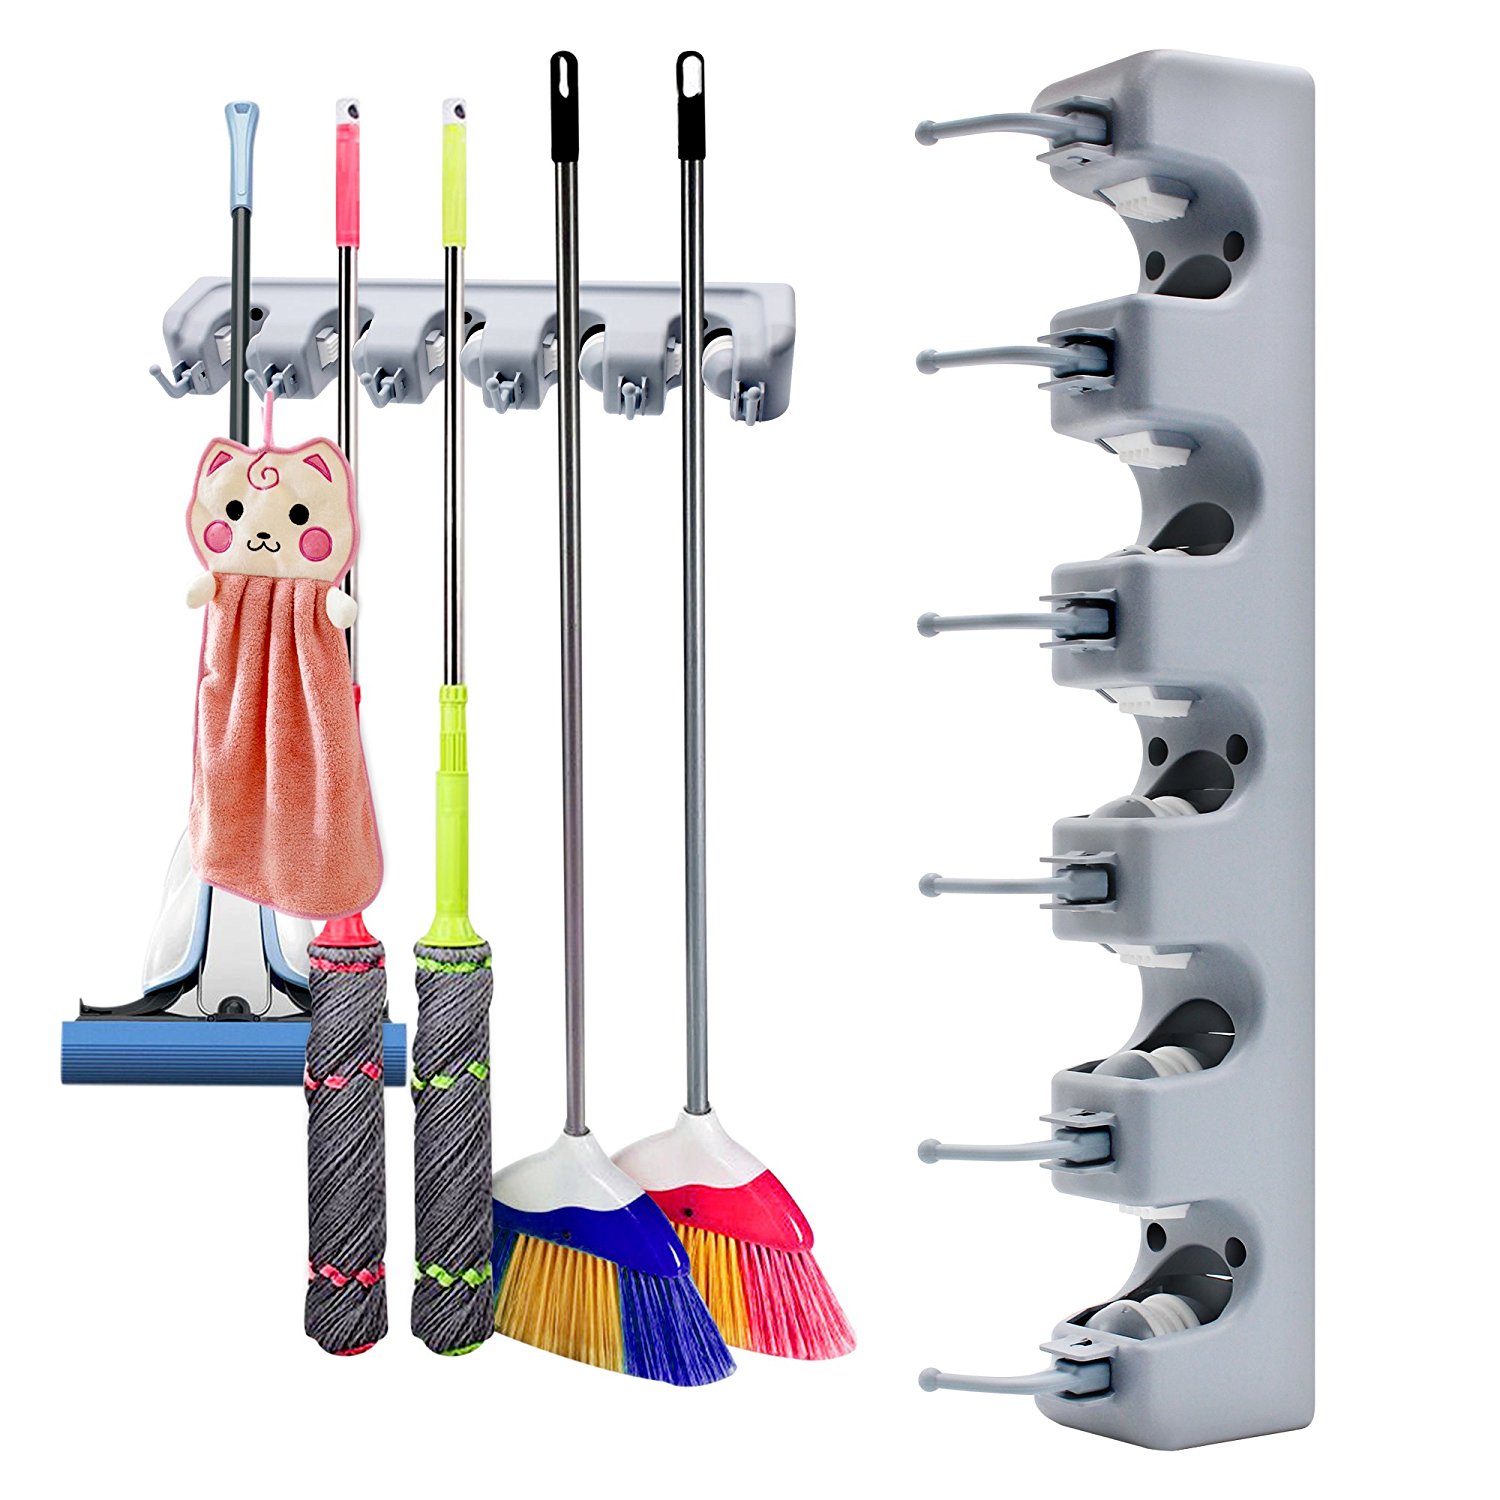 Mop and Broom Holder Wall Mounted Tool Best Offer1500 x 1500